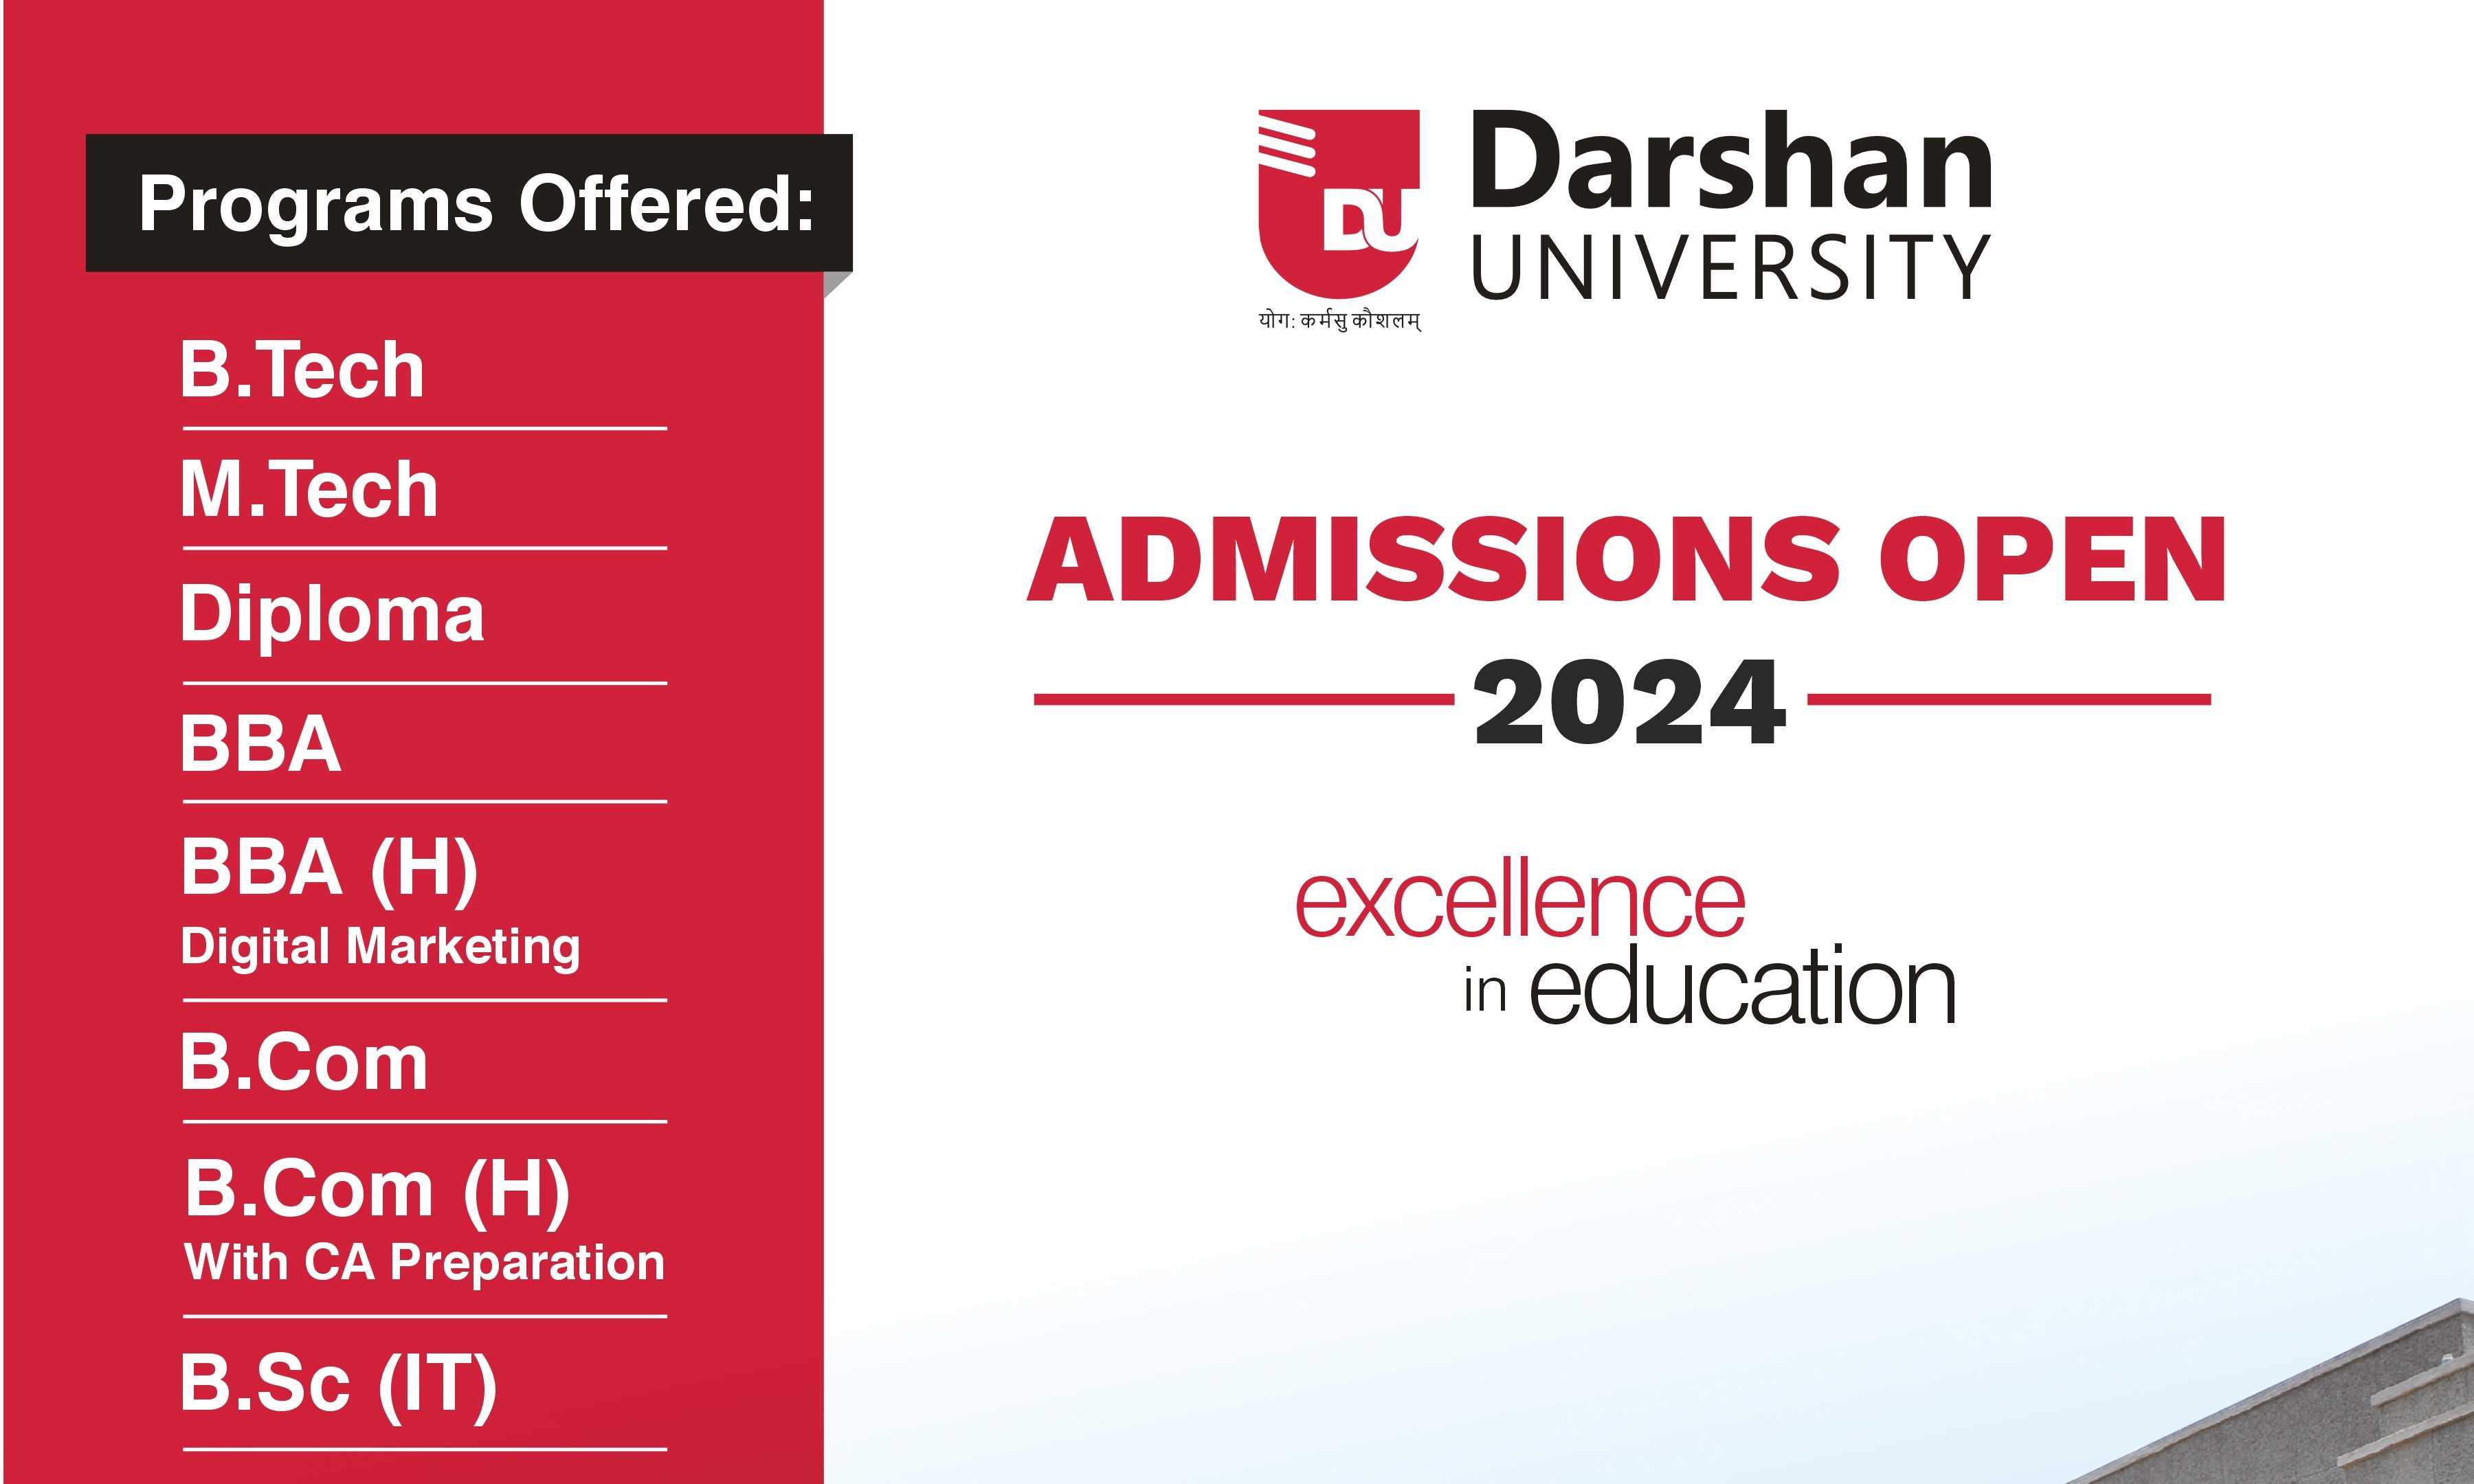 Admissions are Open at Darshan University!